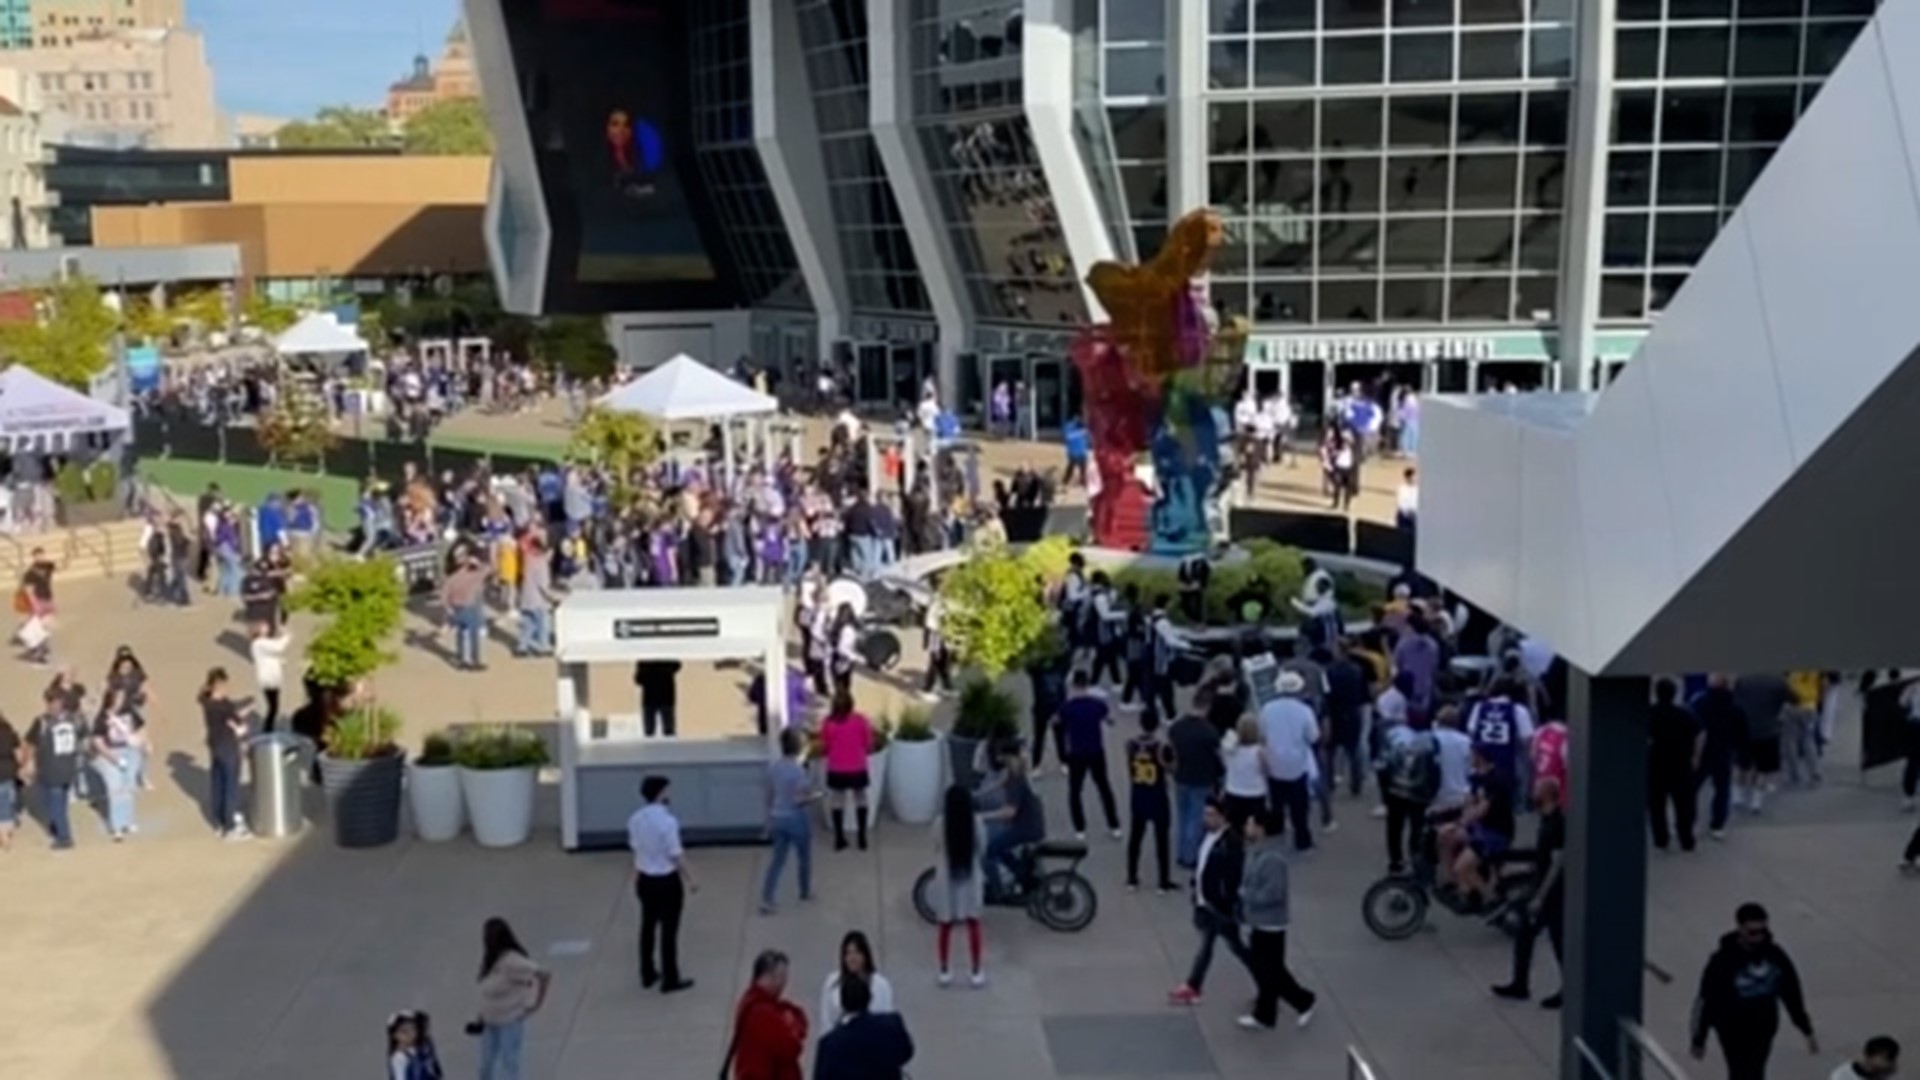 Hype is building up for the Sacramento Kings and Golden State Warriors game